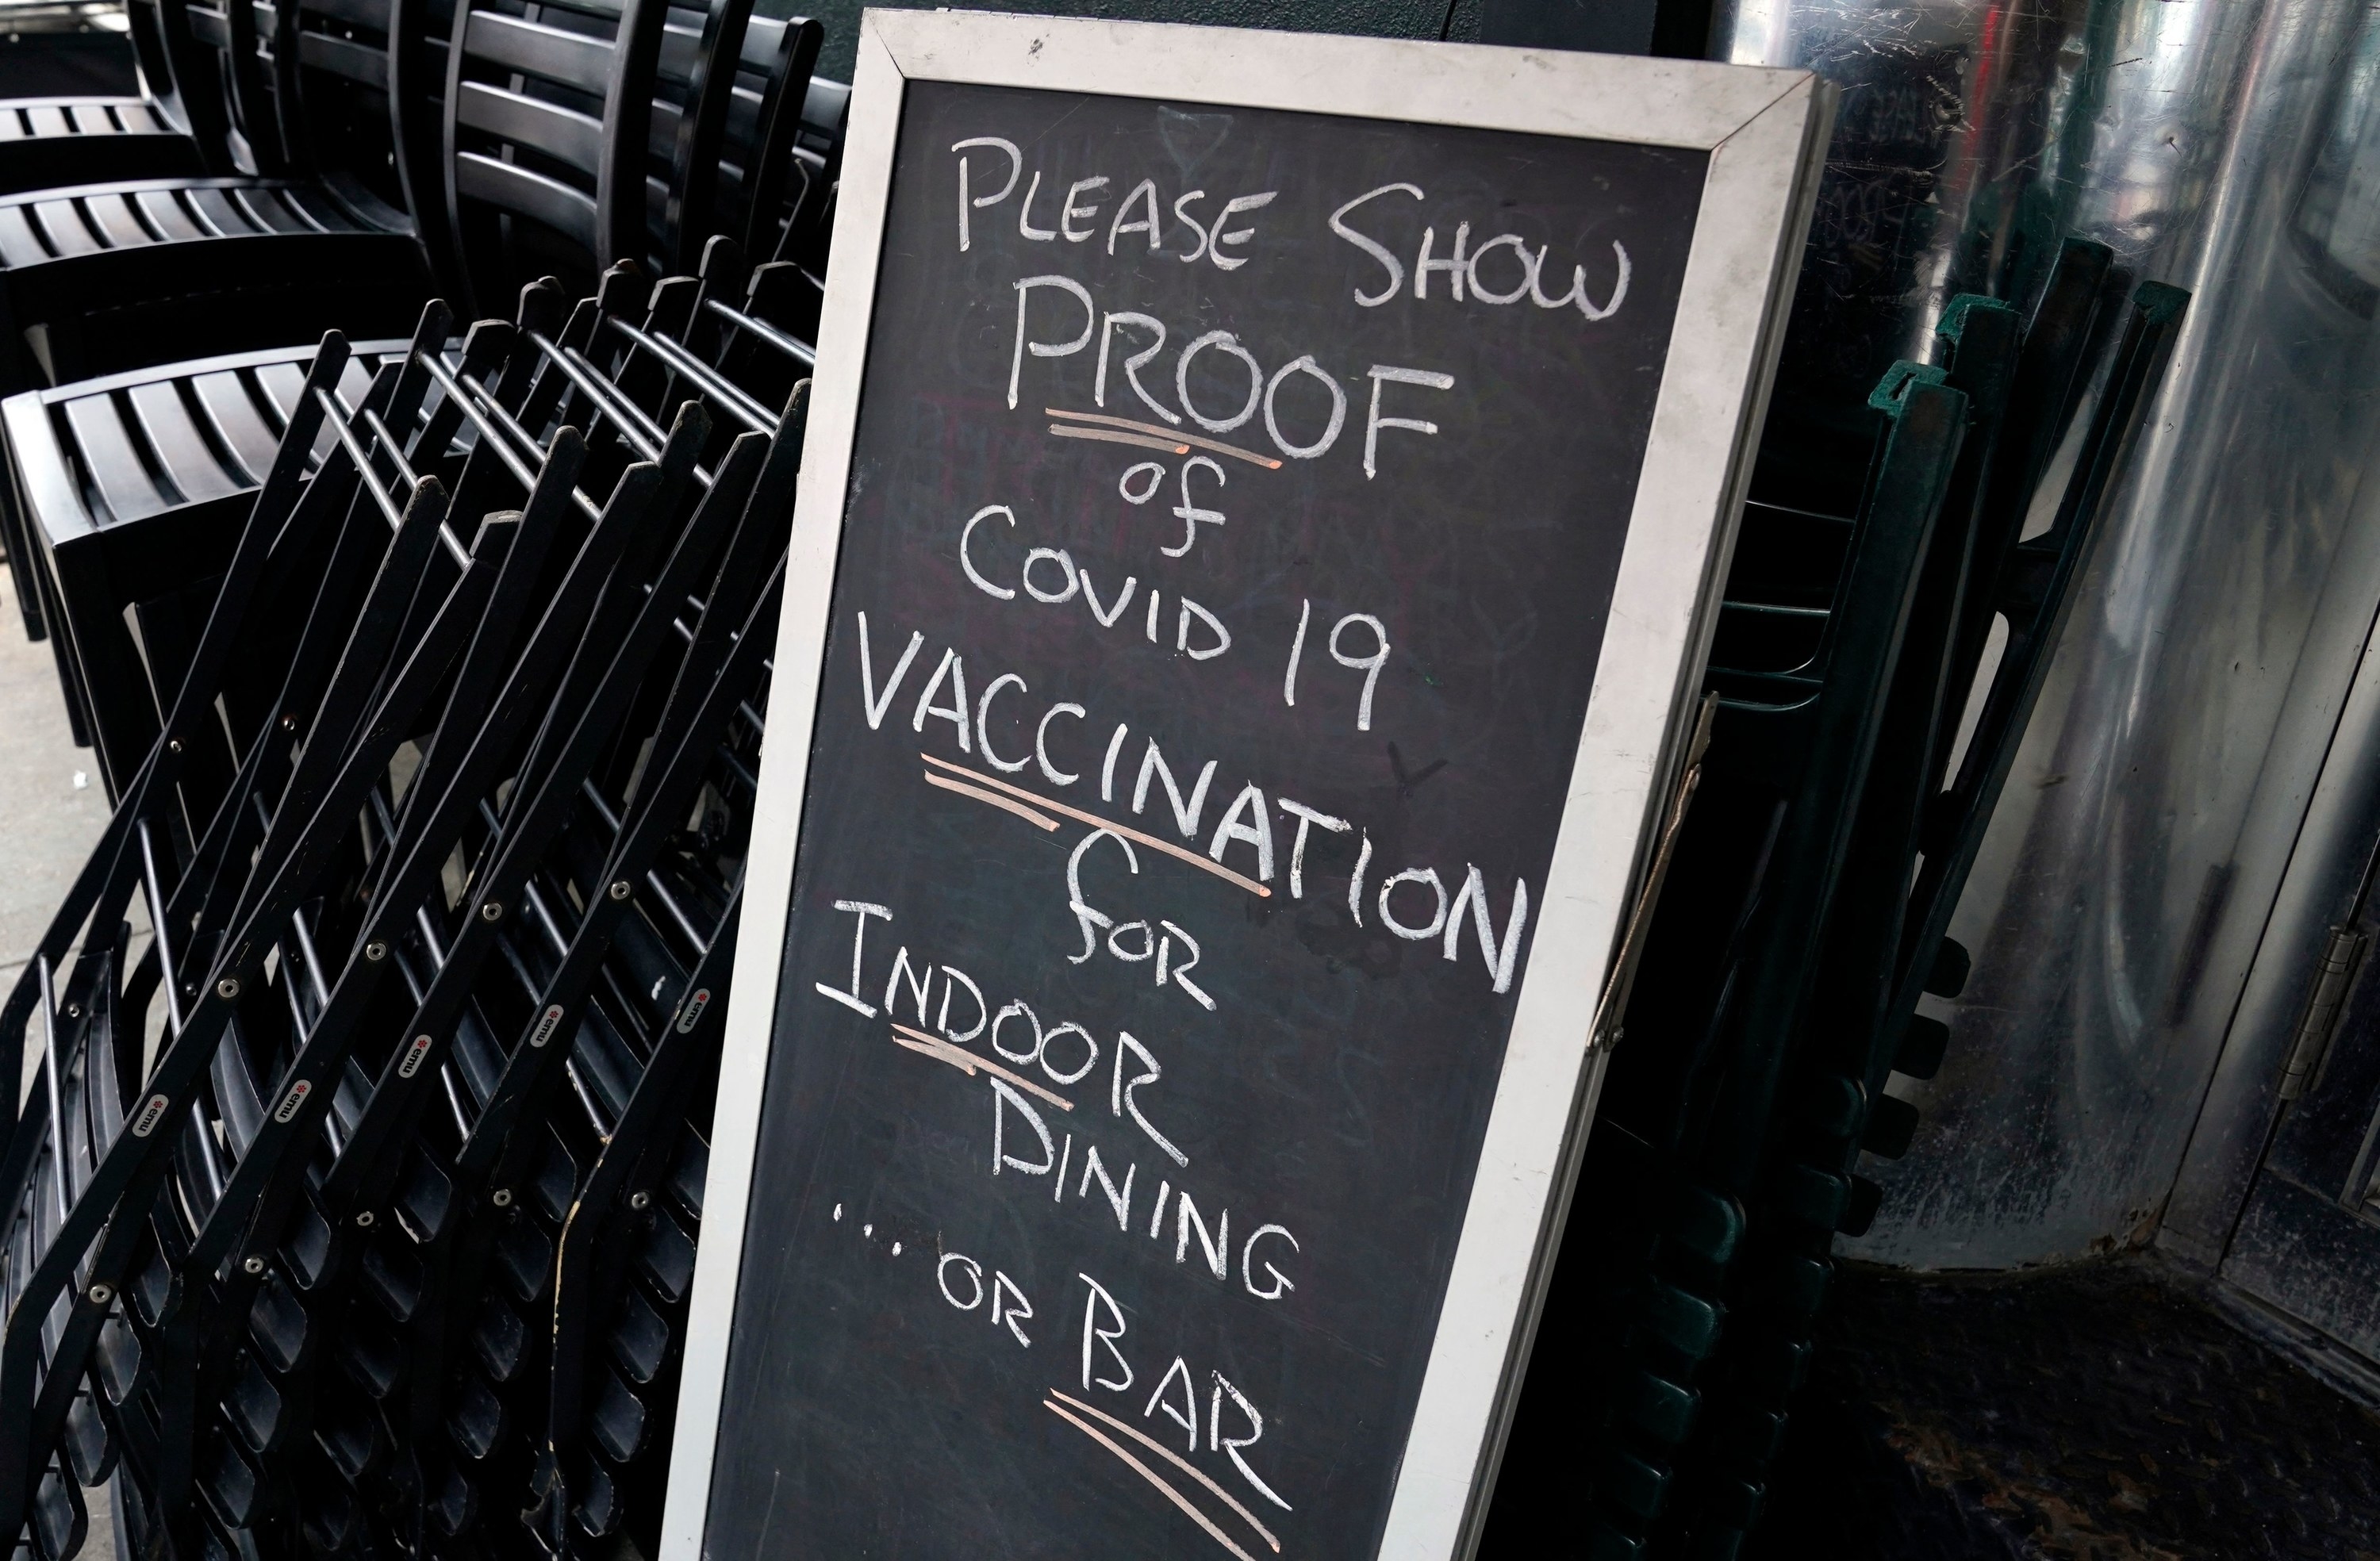 Sign outside restaurant with text: &quot;Please show proof of COVID-19 vaccination for indoor dining or bar&quot;